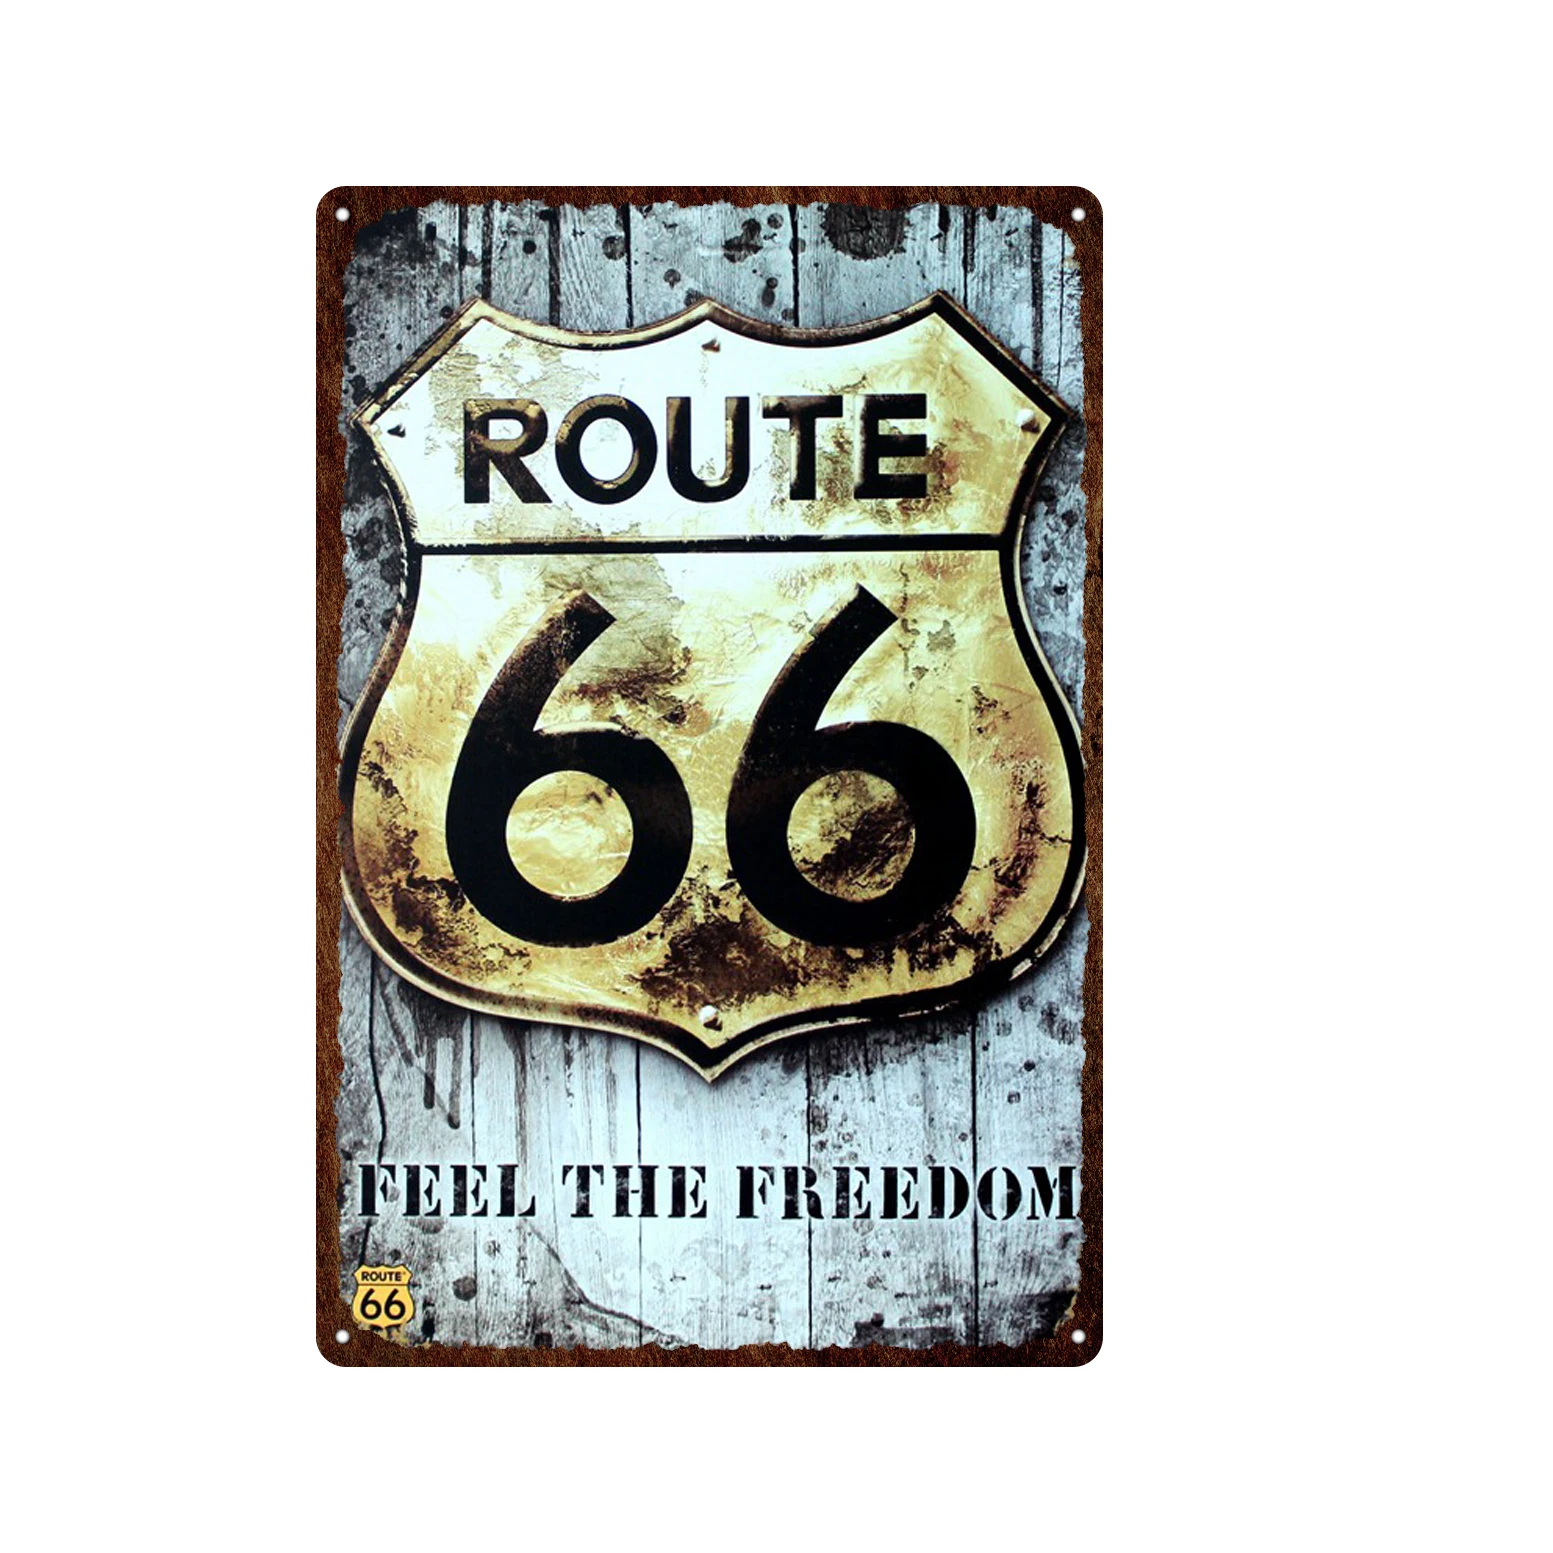 

American Route 66 Tin Sign Plate Feel The Freedom Plaque Metal Vintage Retro Tin Poster for Home Garage Racing Wall Decor